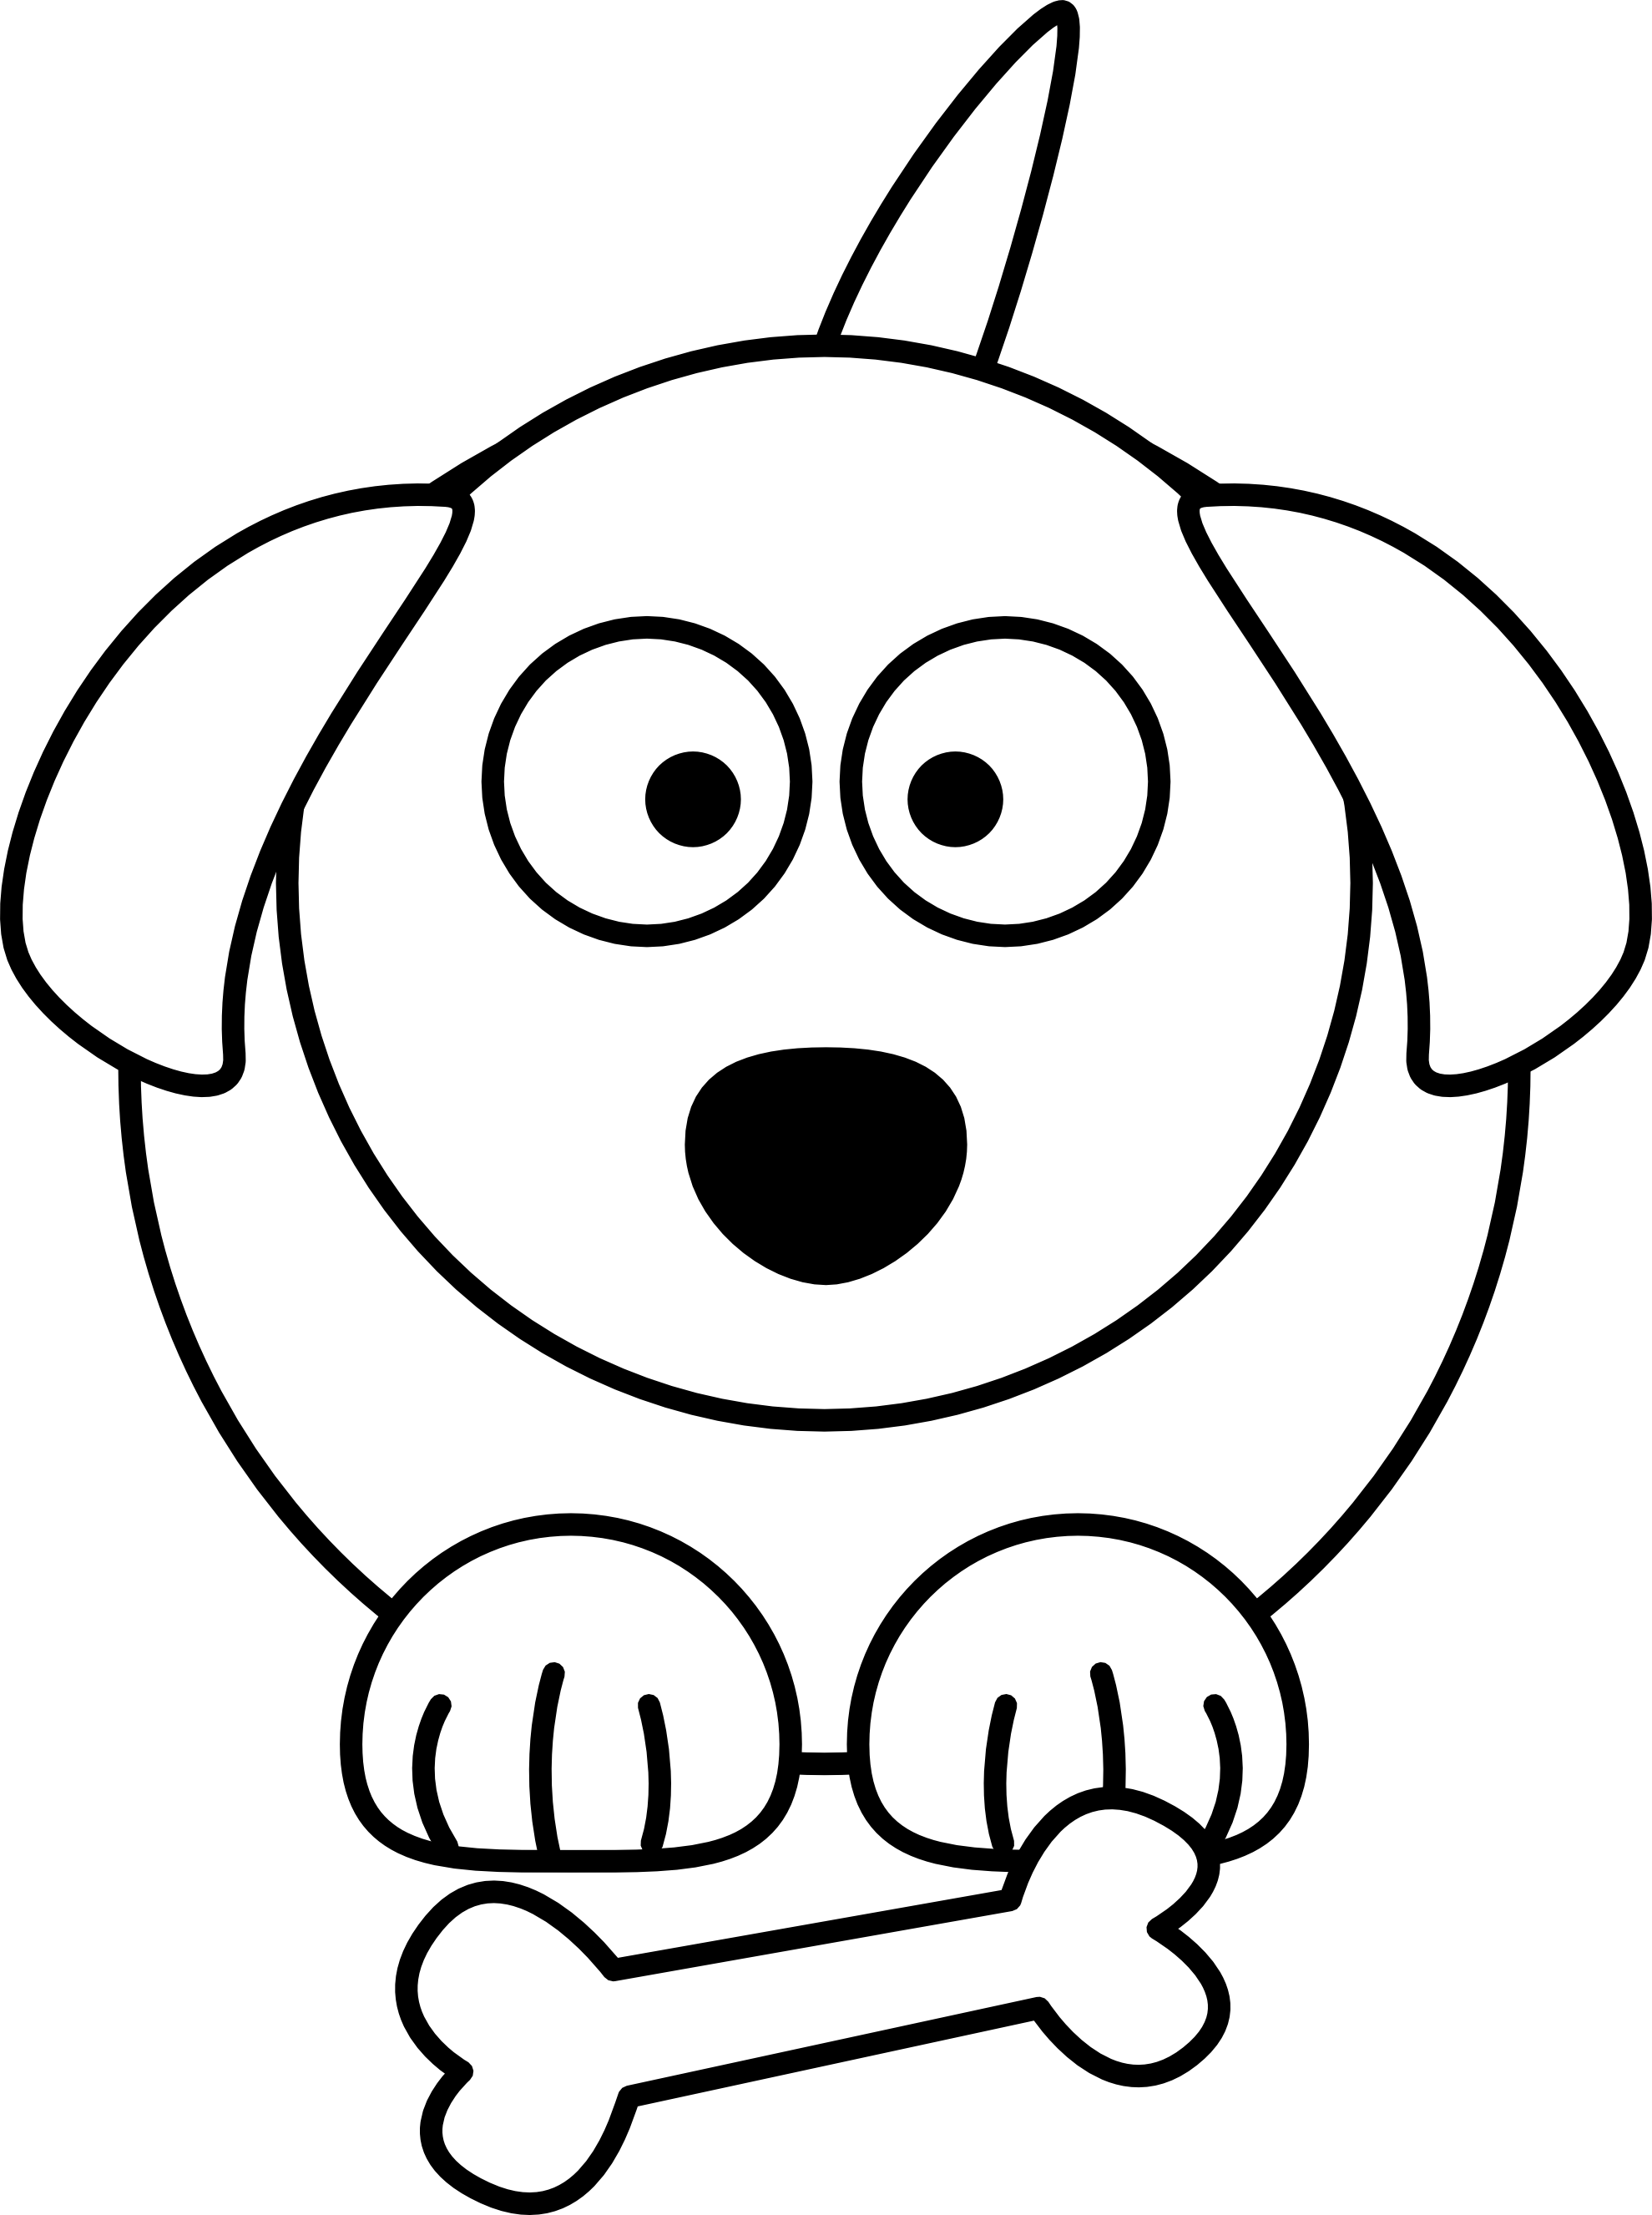 Black And White Cartoon | Free Download Clip Art | Free Clip Art ...